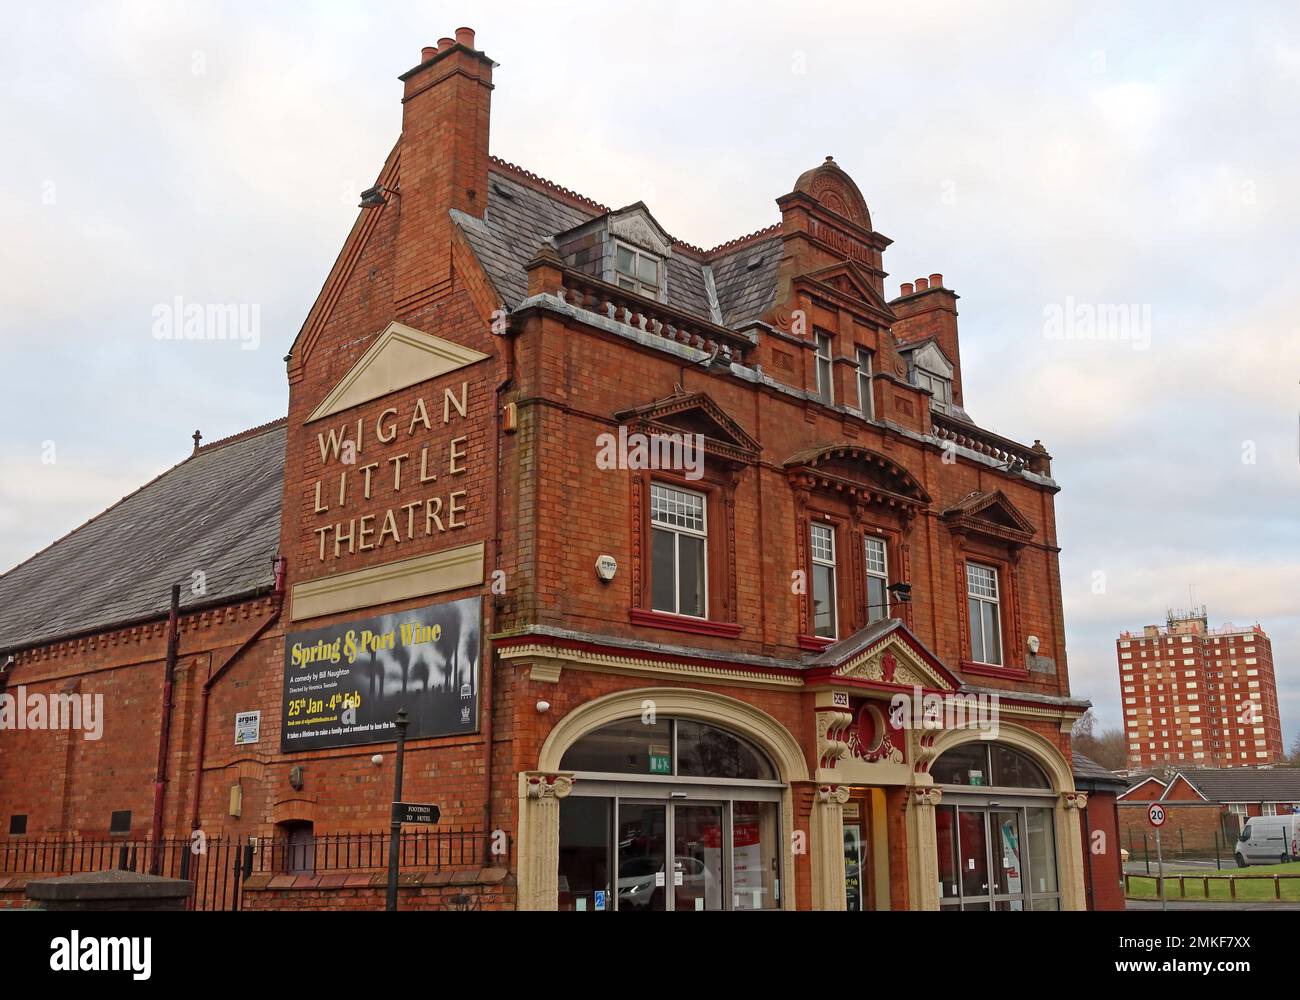 The Wigan Little Theatre, 44 Crompton St, Wigan, Lancashire, Angleterre, ROYAUME-UNI, WN1 3SL Banque D'Images